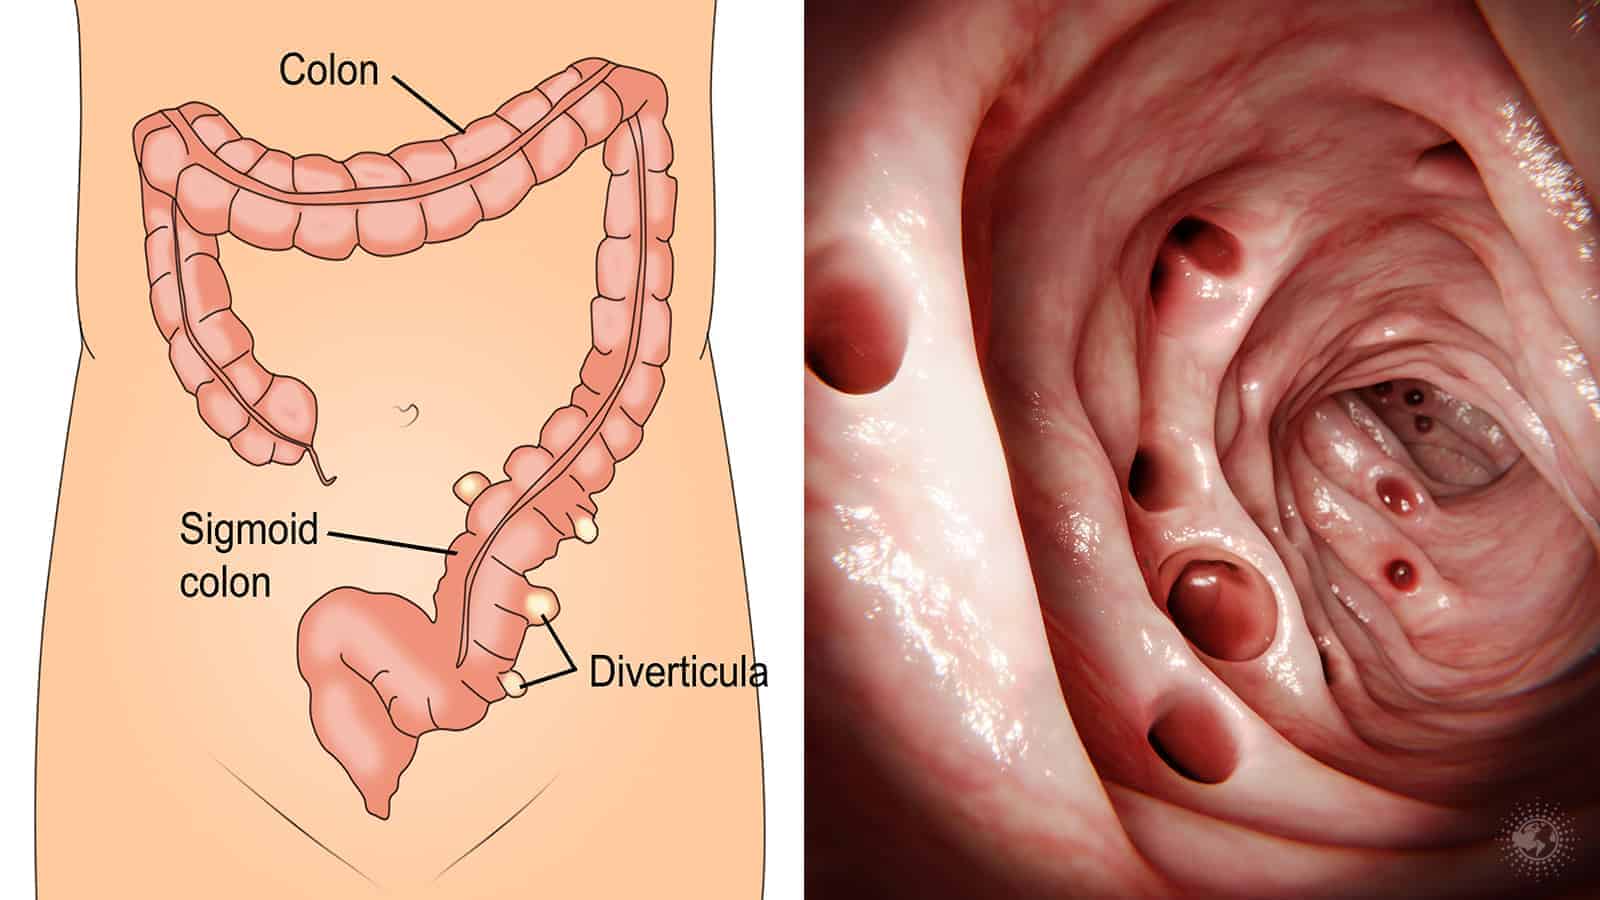 7 Symptoms of Diverticulitis (And Natural Remedies To Help Fix It)